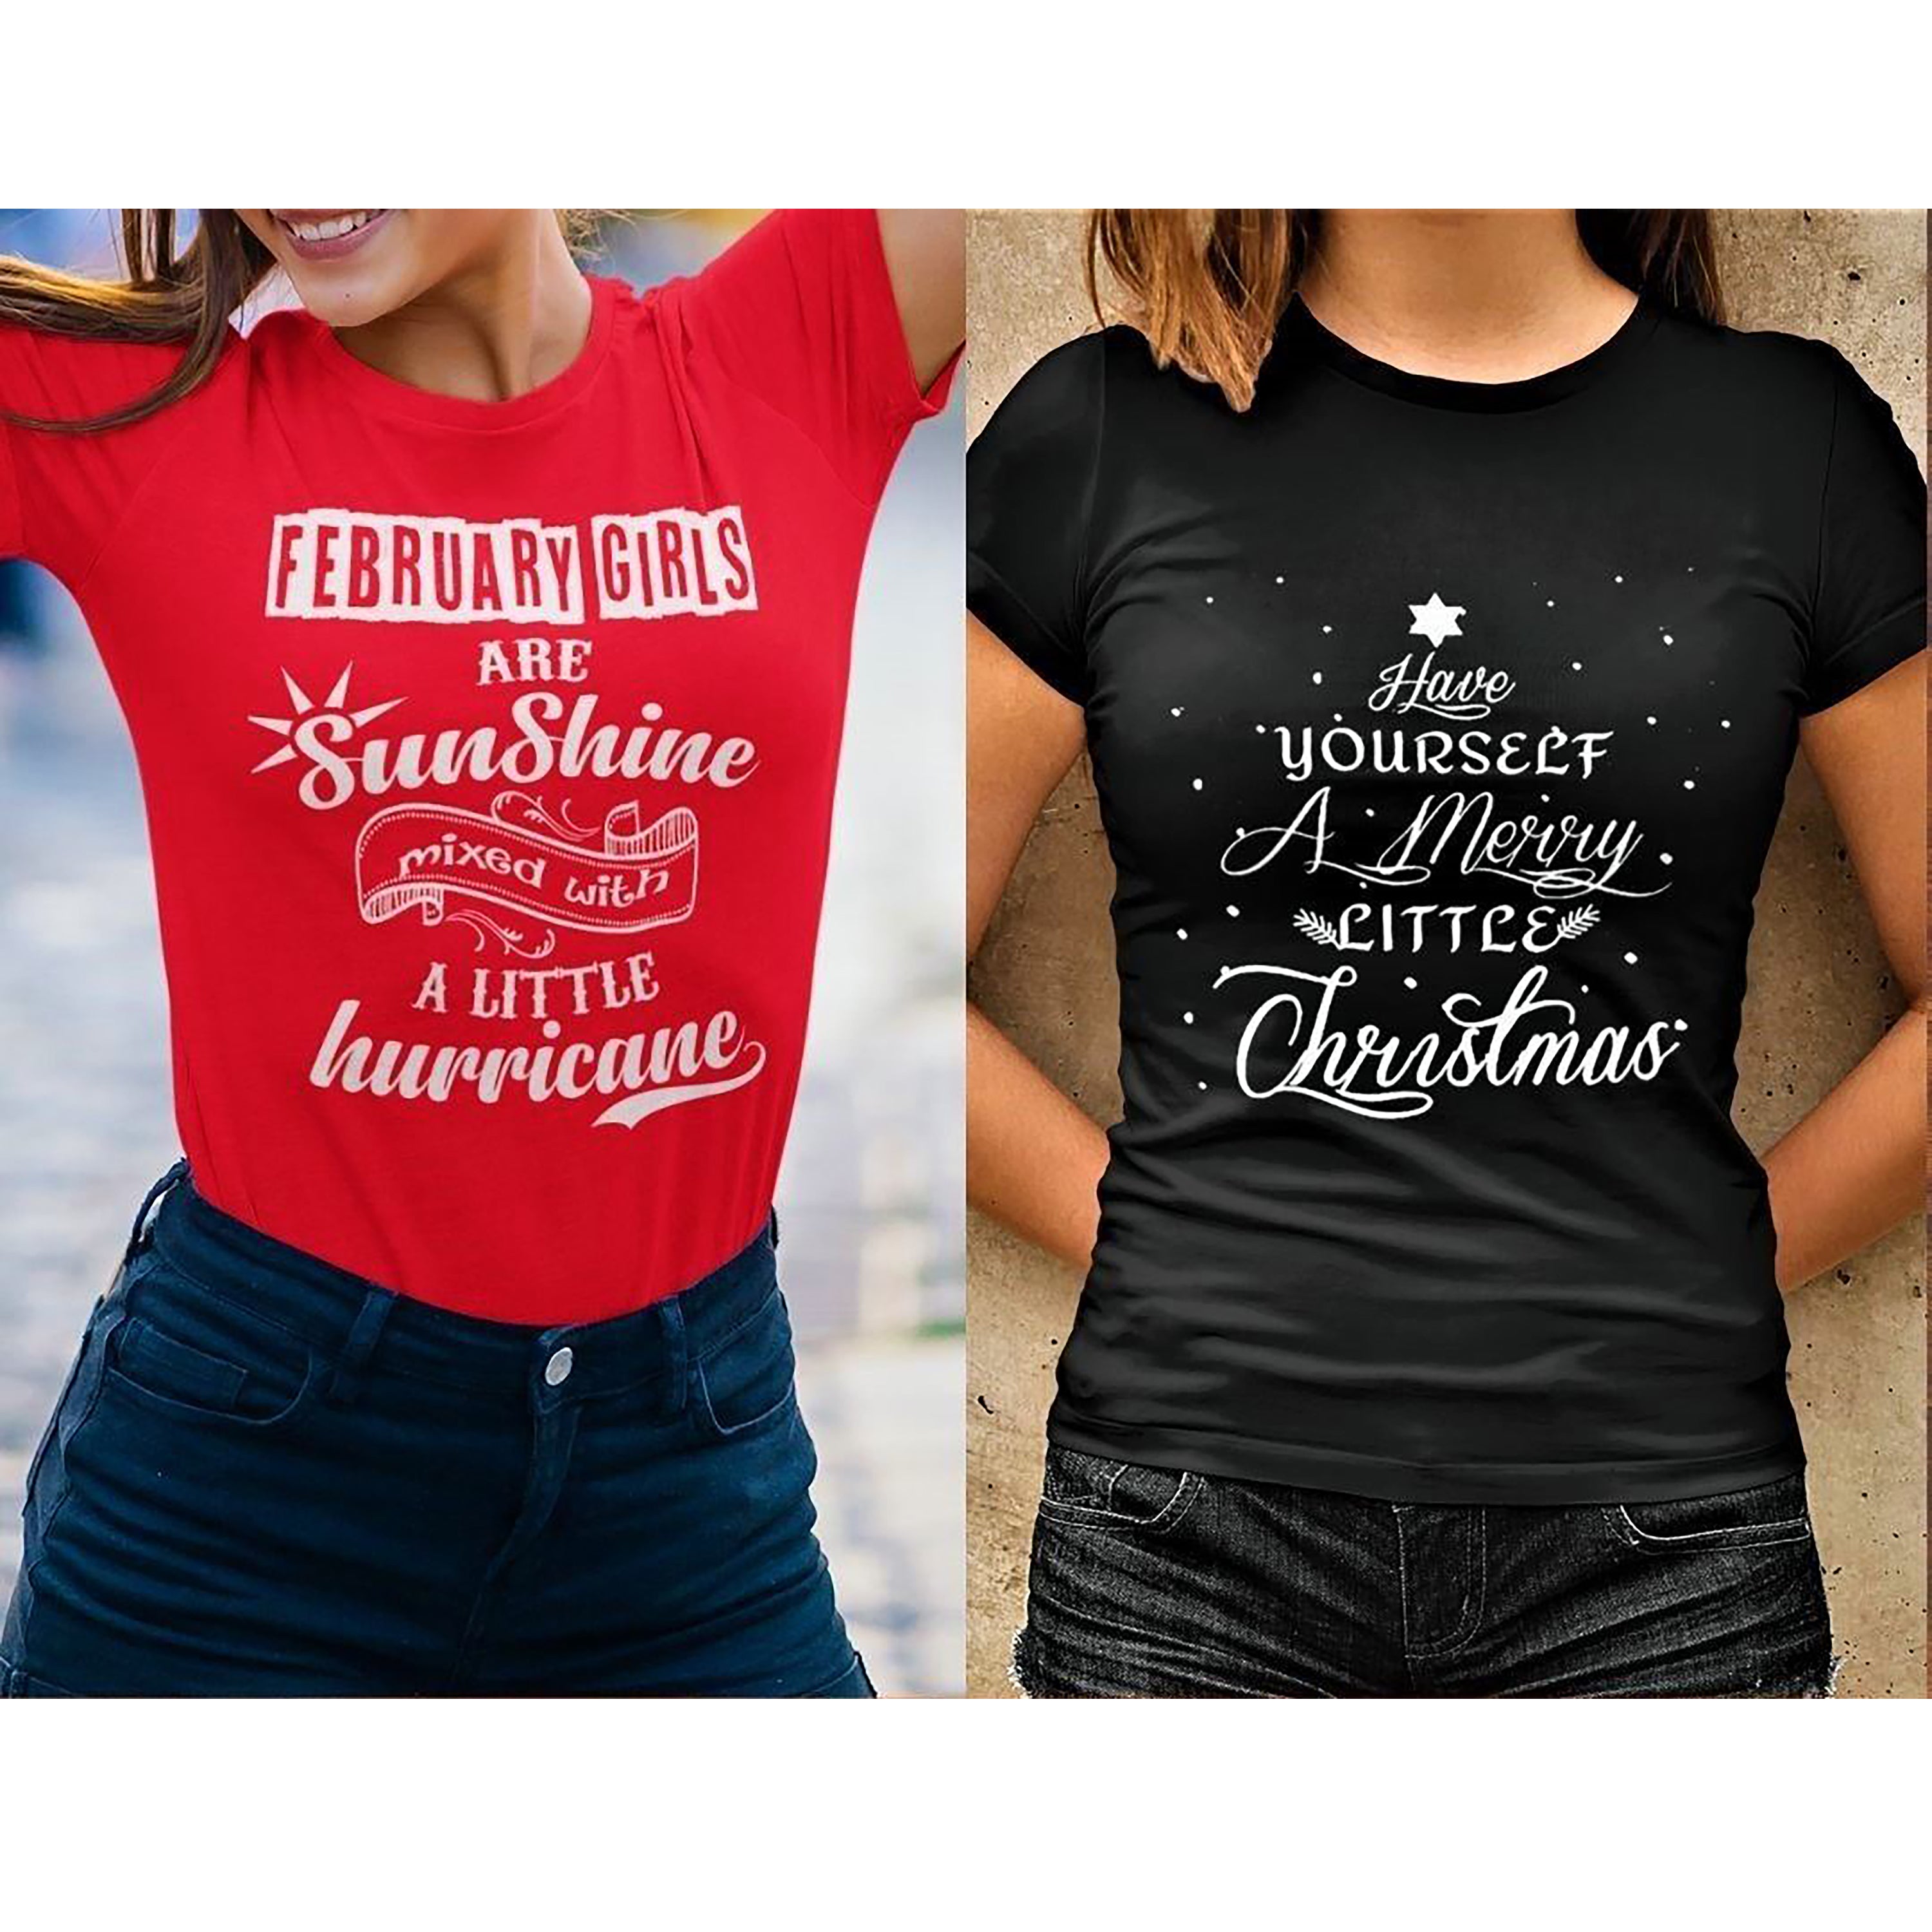 "2 Awesome Designs Combo- February Sunshine + Merry Little Christmas".